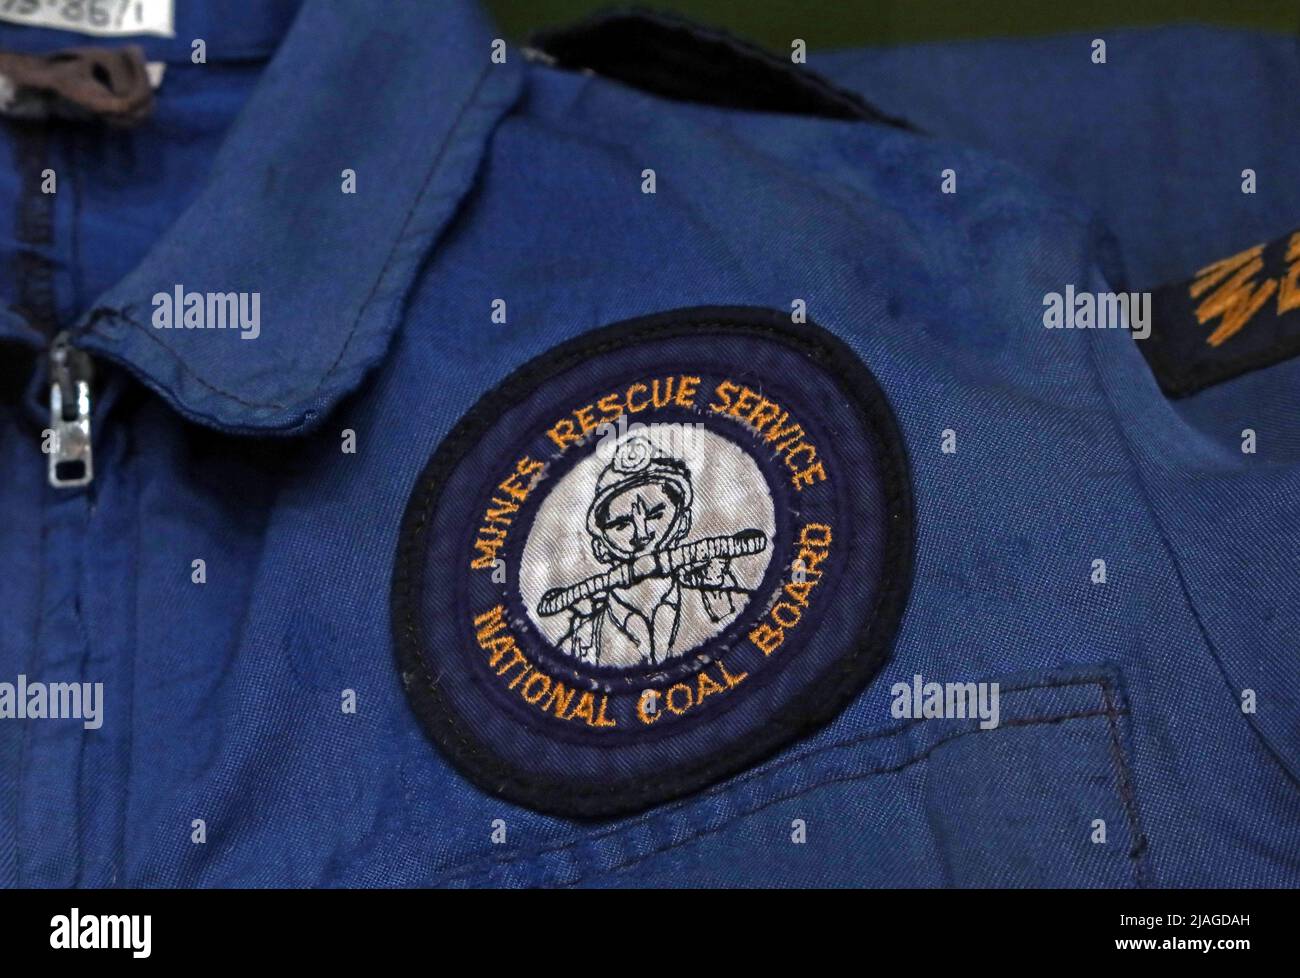 MRS - Mines Rescue Service badge on a jacket, National Coal Board, South Wales, UK Stock Photo